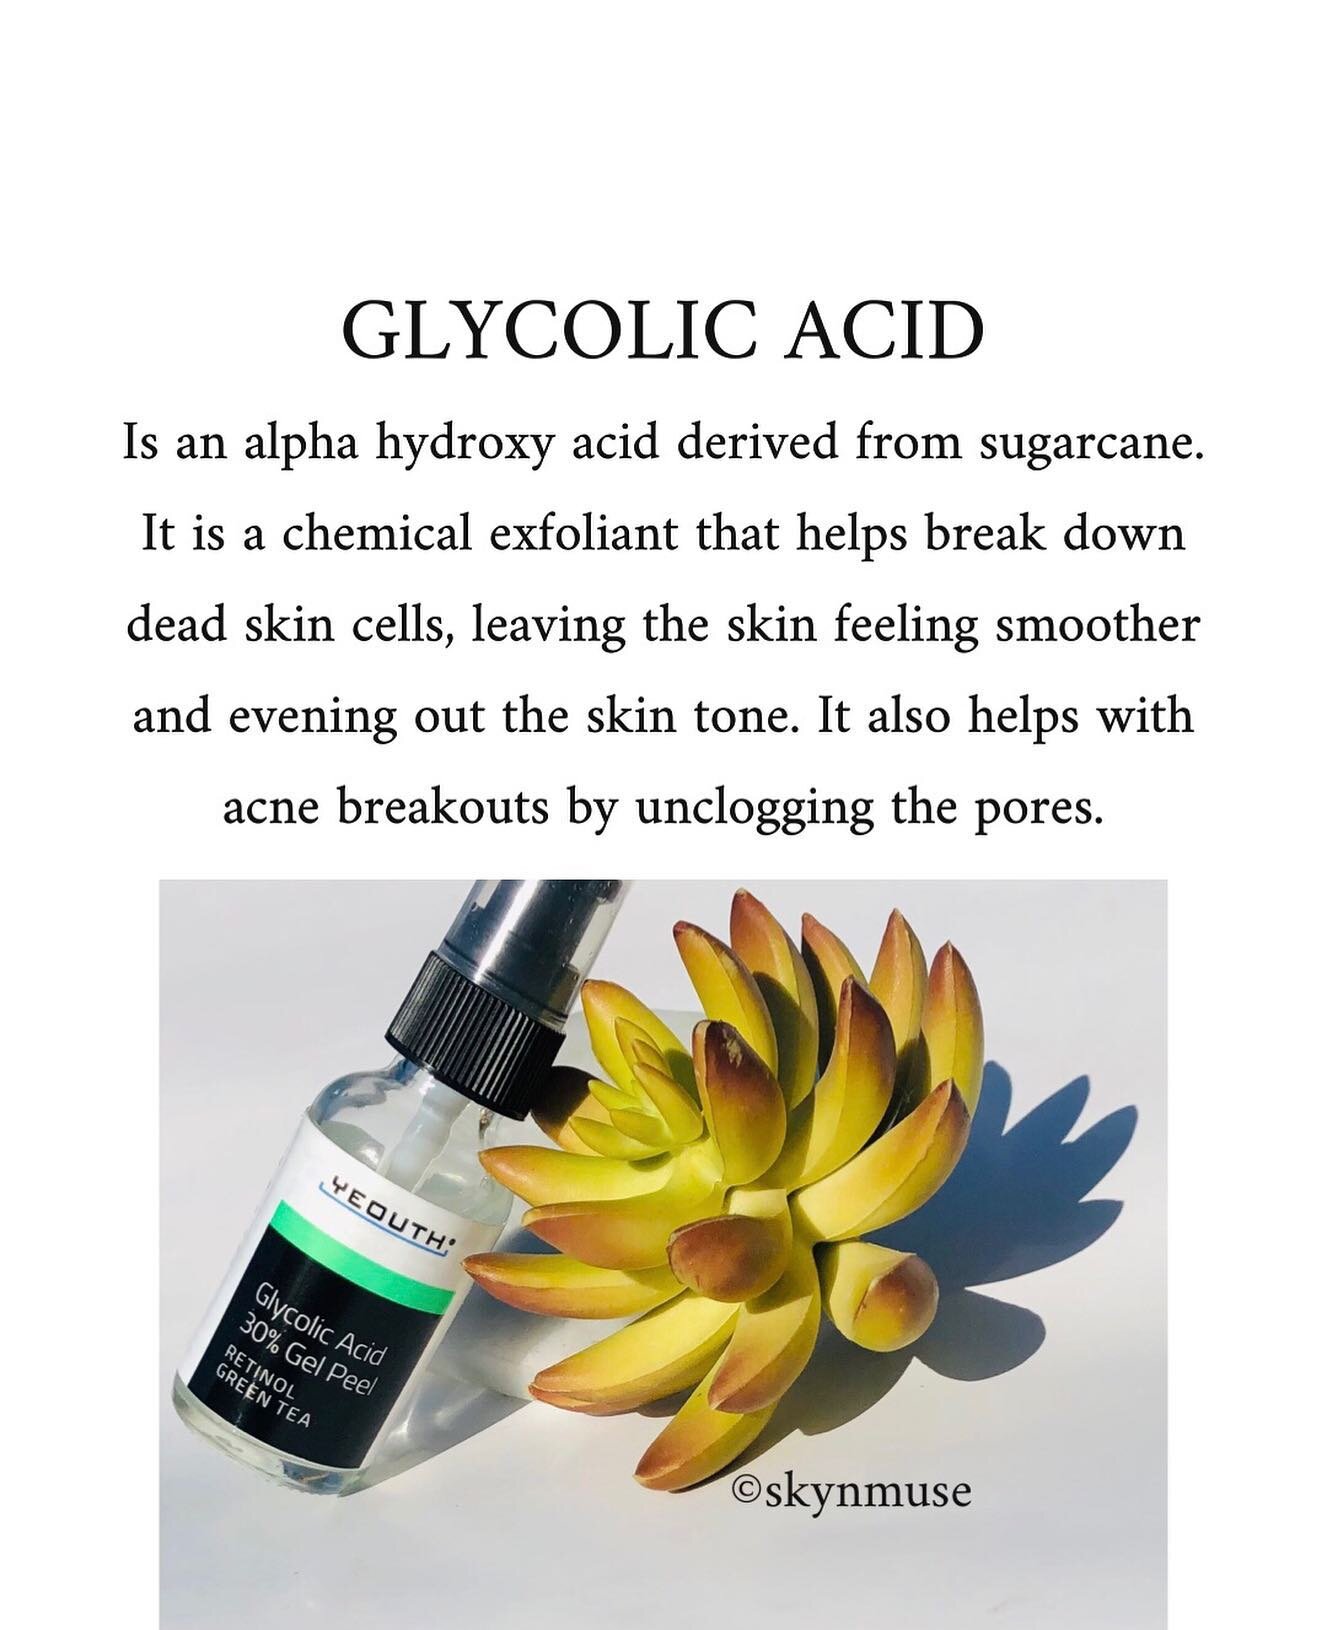 Have you ever used glycolic acid on your skin? Do you know the benefits for your skin? Stay tune for a blogpost talking all about glycolic acid 💫

#glycolicacid #glycolicpeel #glycolic #aha #ahaskincare #alphahydroxyacids #exfoliate #exfoliante #exf